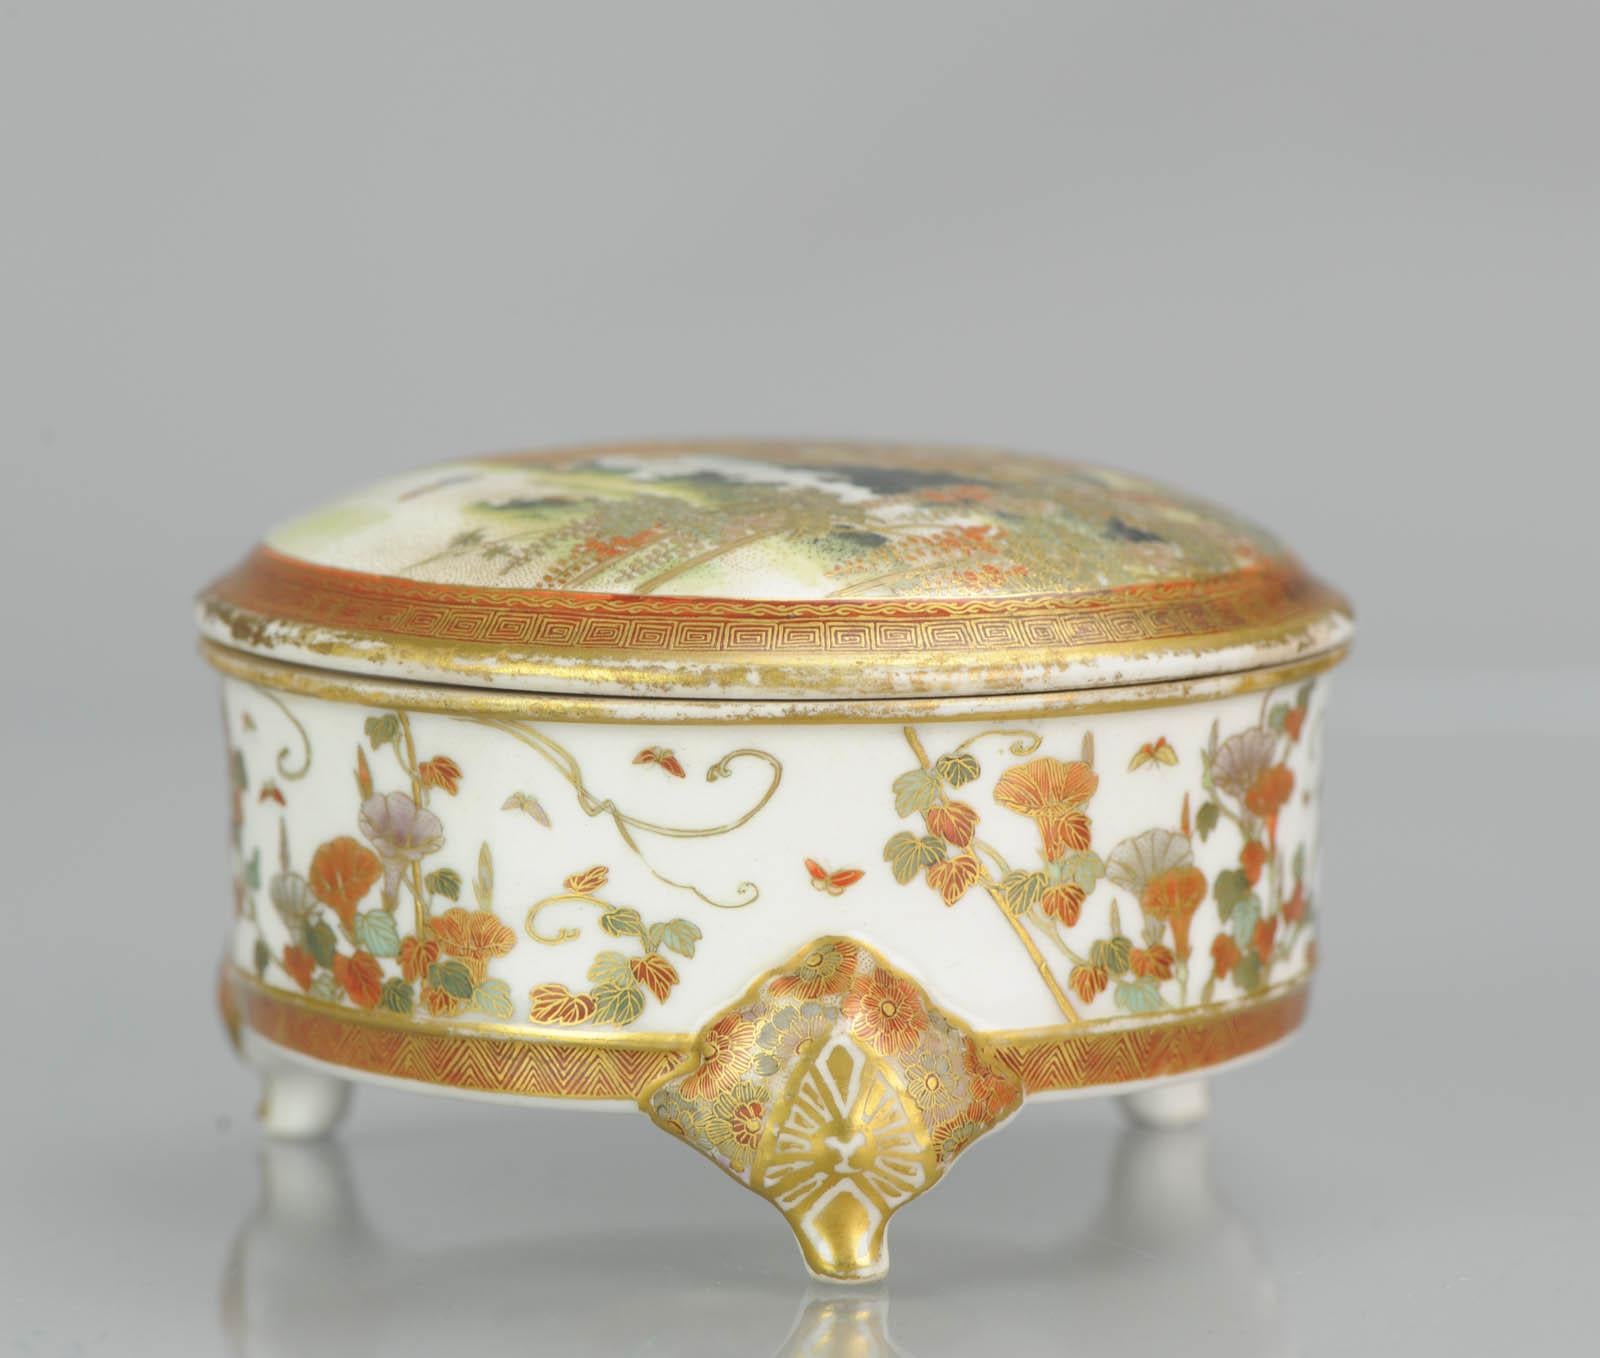 Fabulous Japanese Satsuma ware tripod lidded box. The lid has a Landscape scene with pagode. Please check the details, in the house you can see figures and 1 waiting at the door.
At the beginning of the bridge there is a sign with a text > It reads